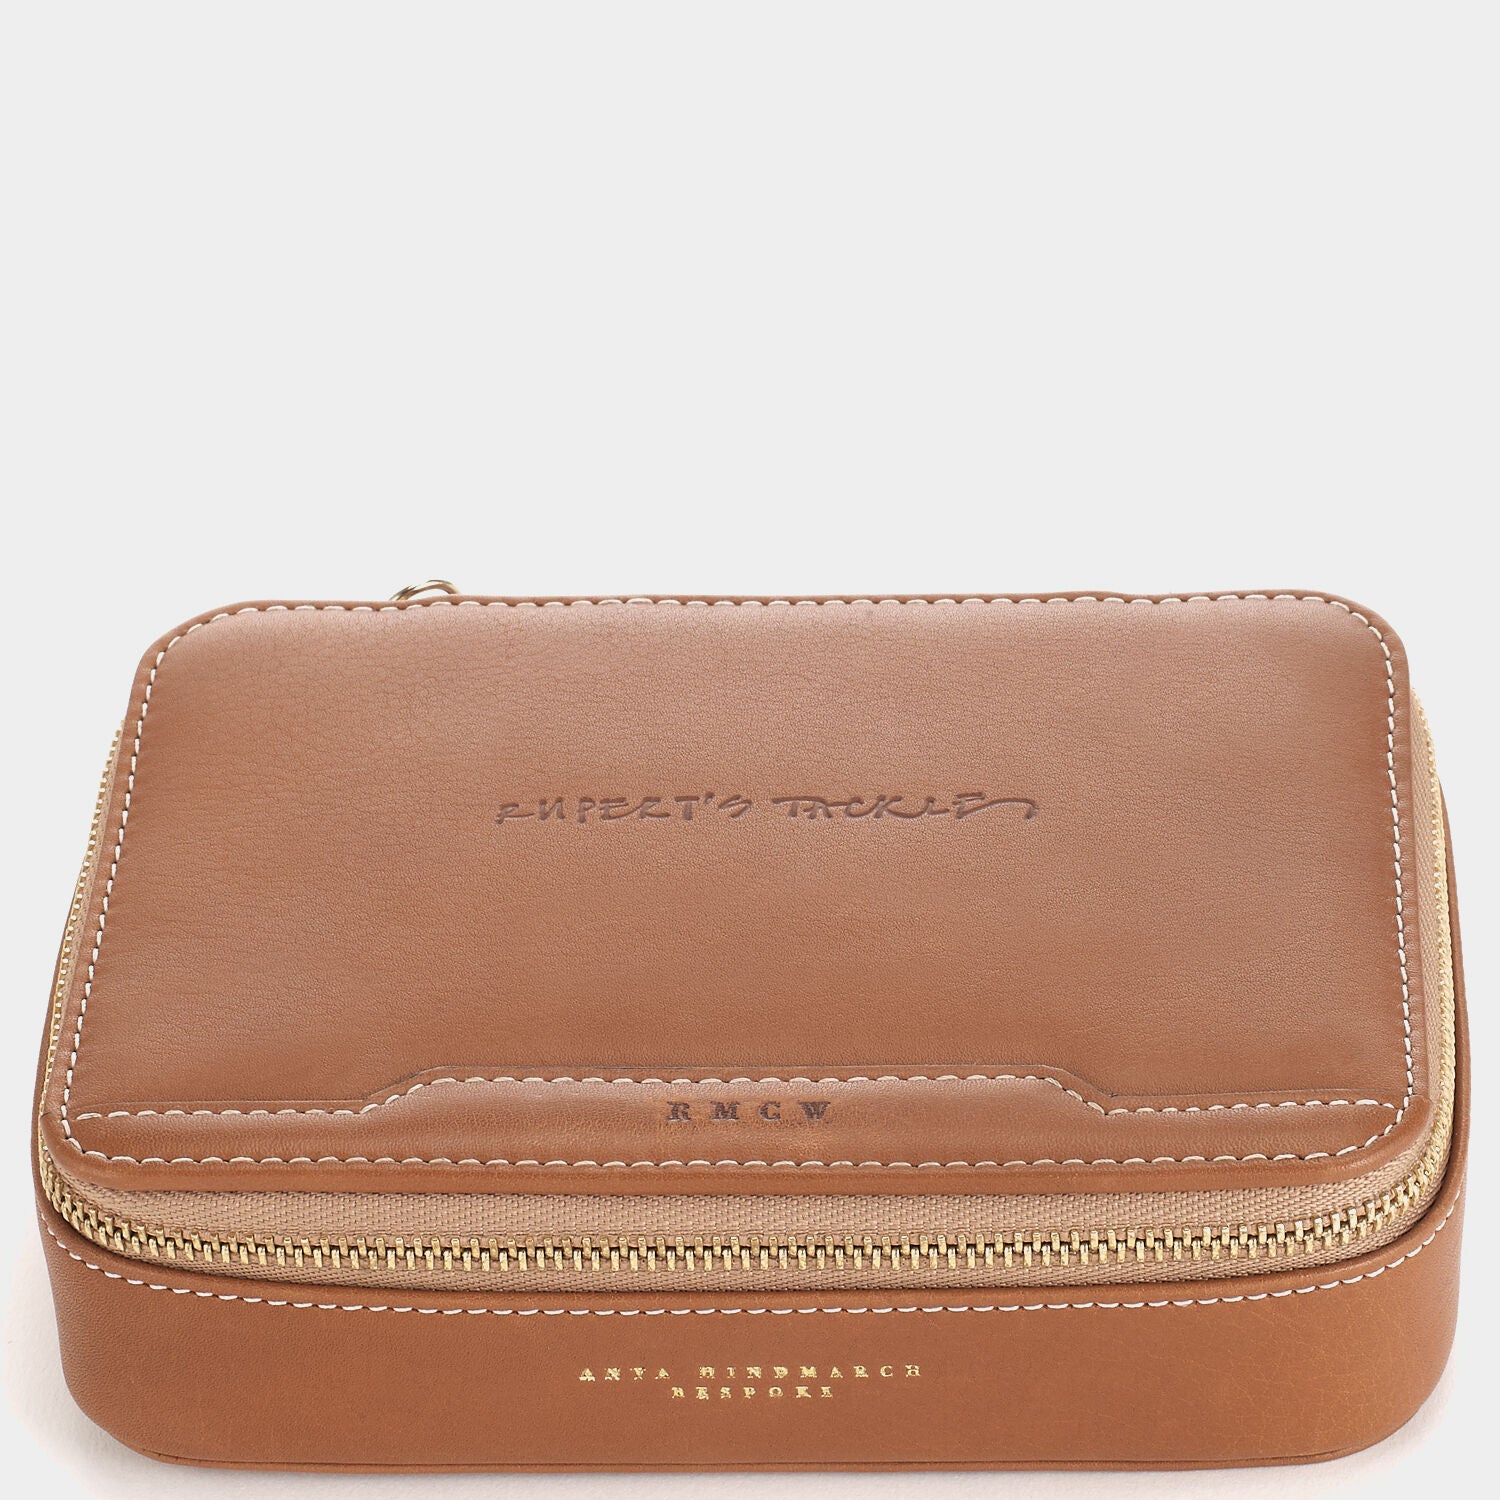 Bespoke Fishermans Fly Box -

                  
                    Butter Leather in Tan -
                  

                  Anya Hindmarch UK
